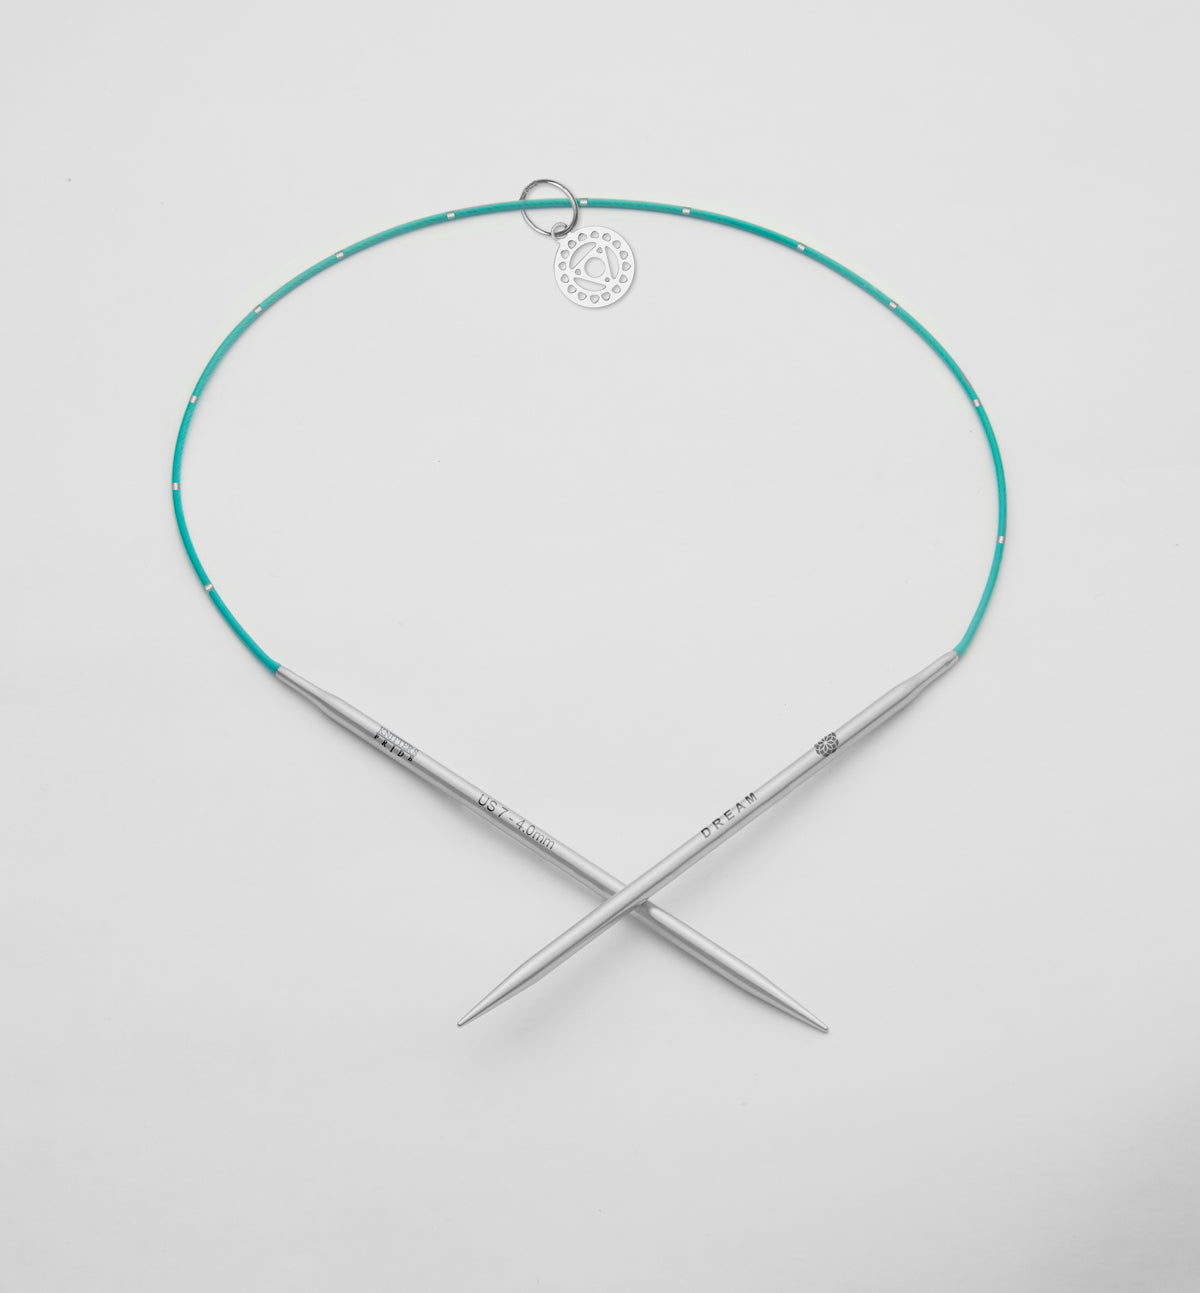 Circular Needles 16 inch | Knitter's Pride Mindful Lace